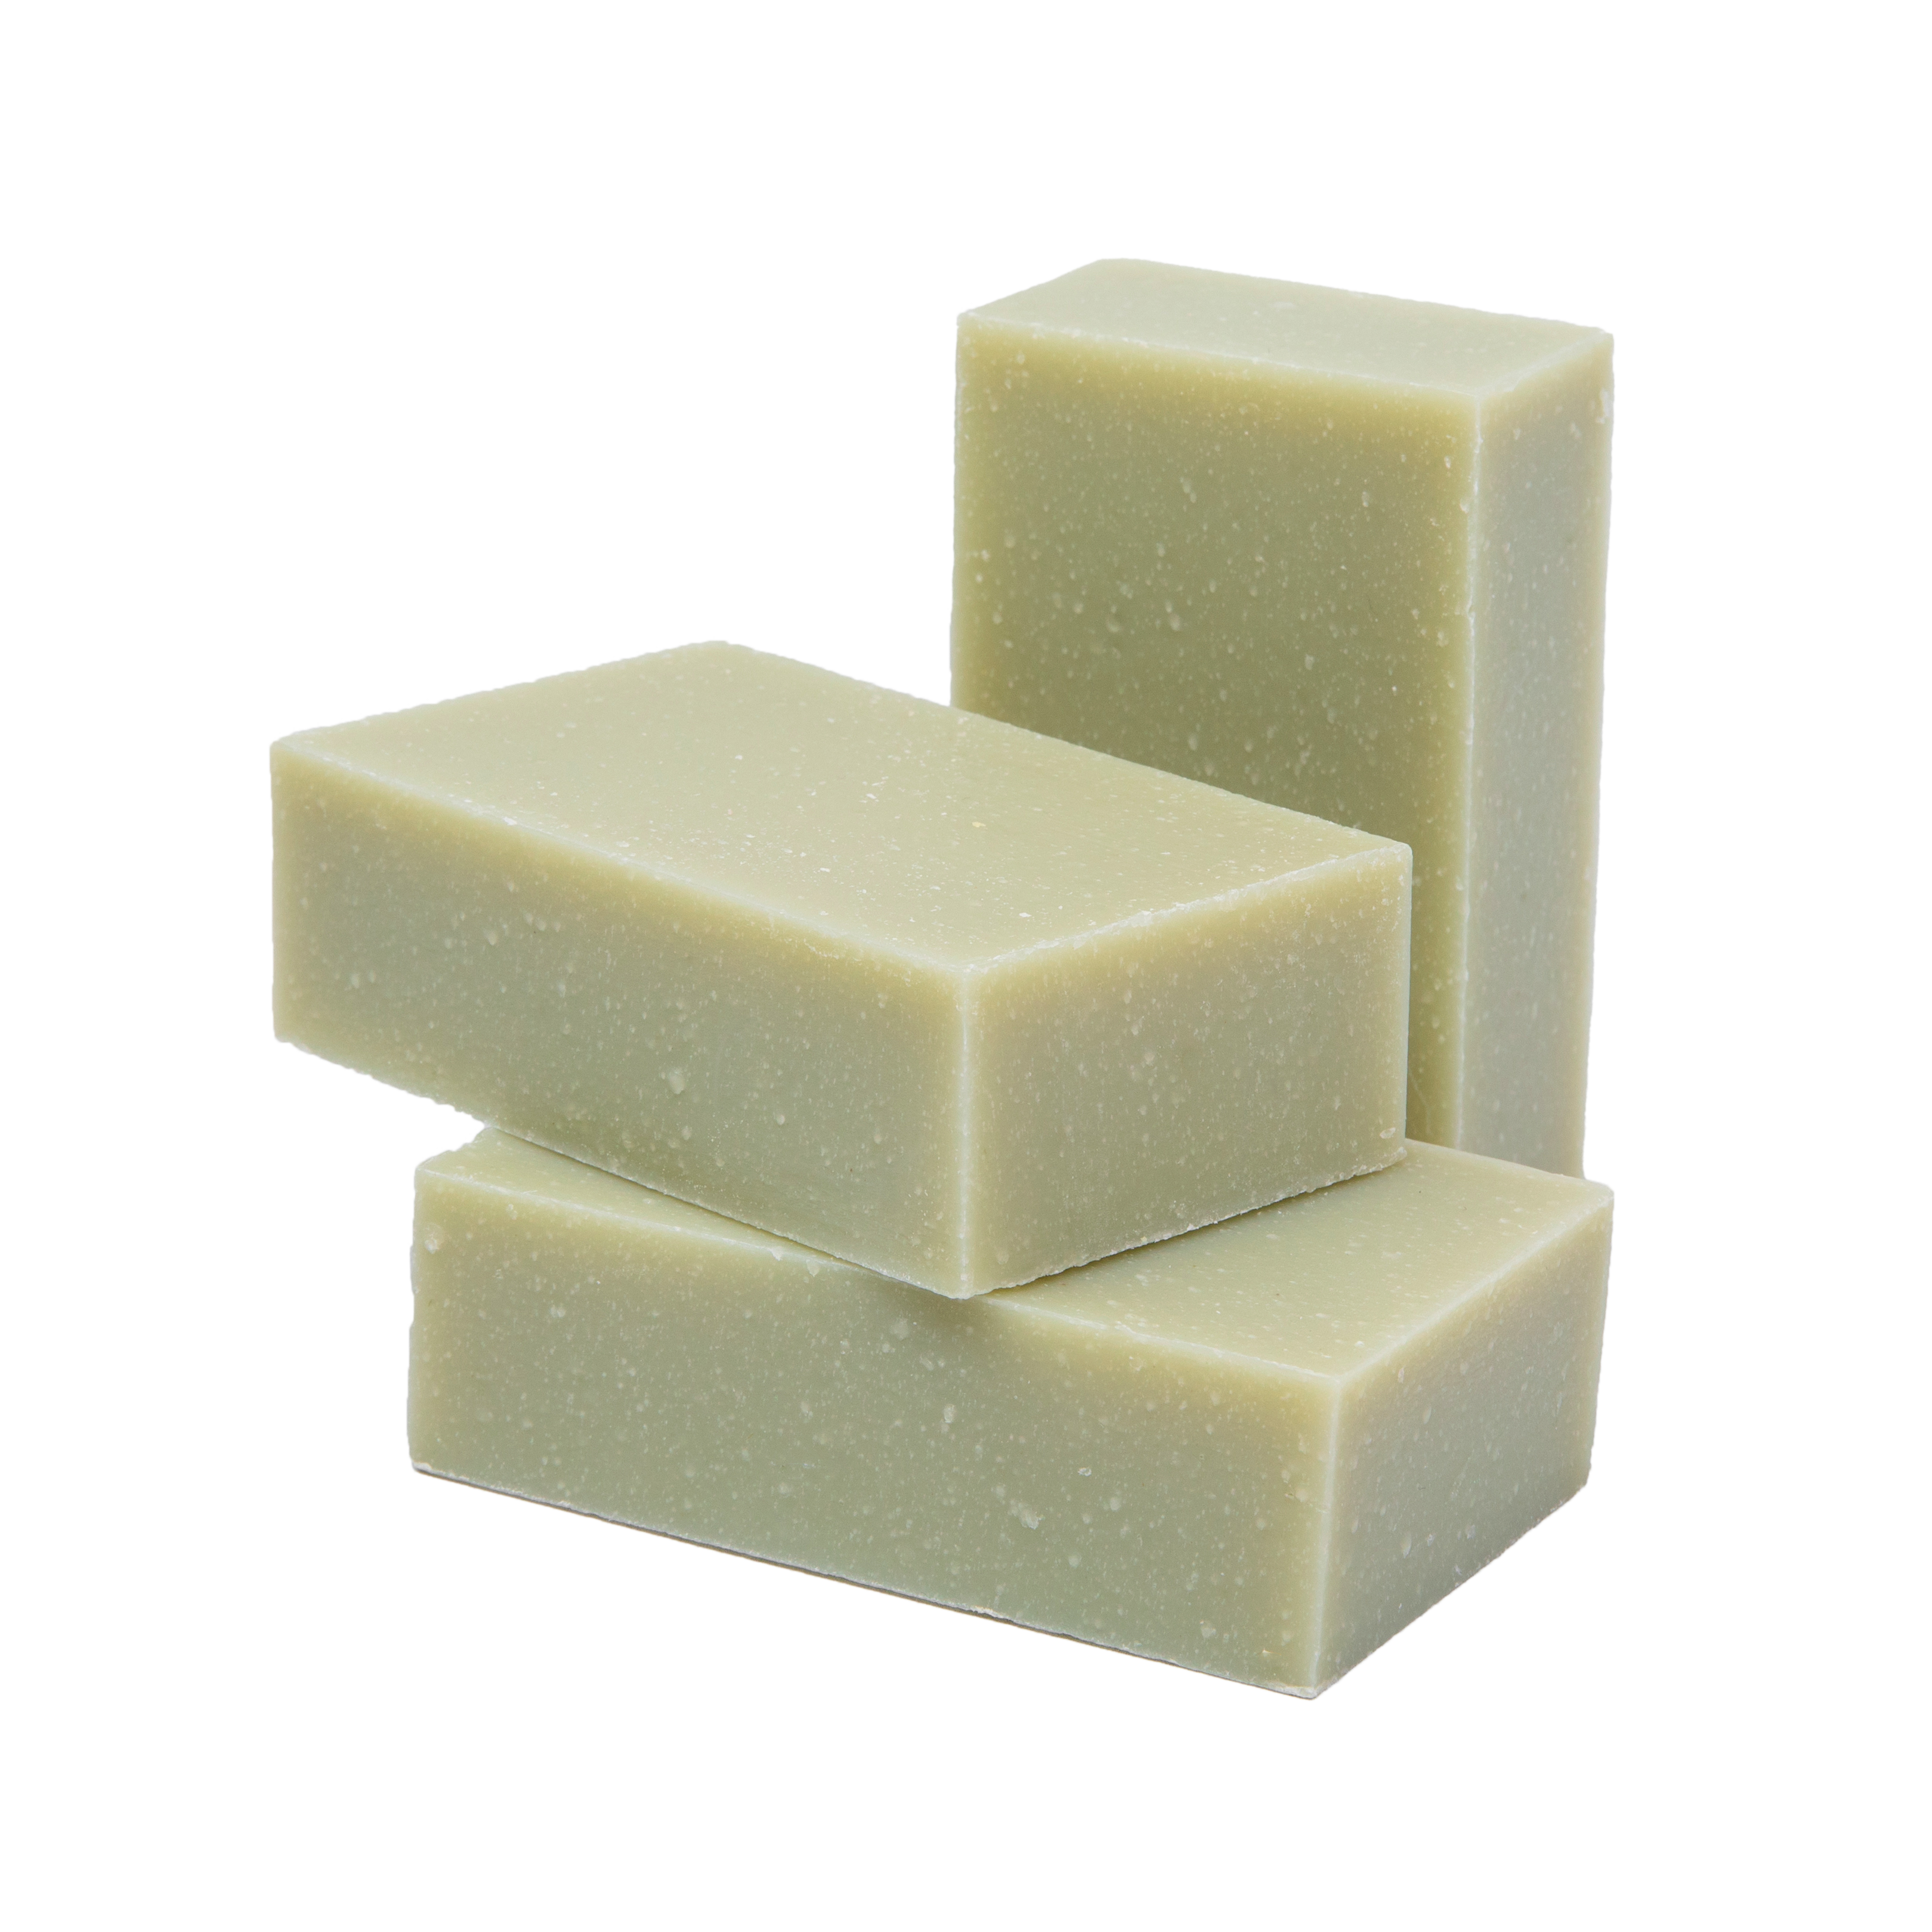 Green Clay and Olive Oil Bar Soap - 4 oz